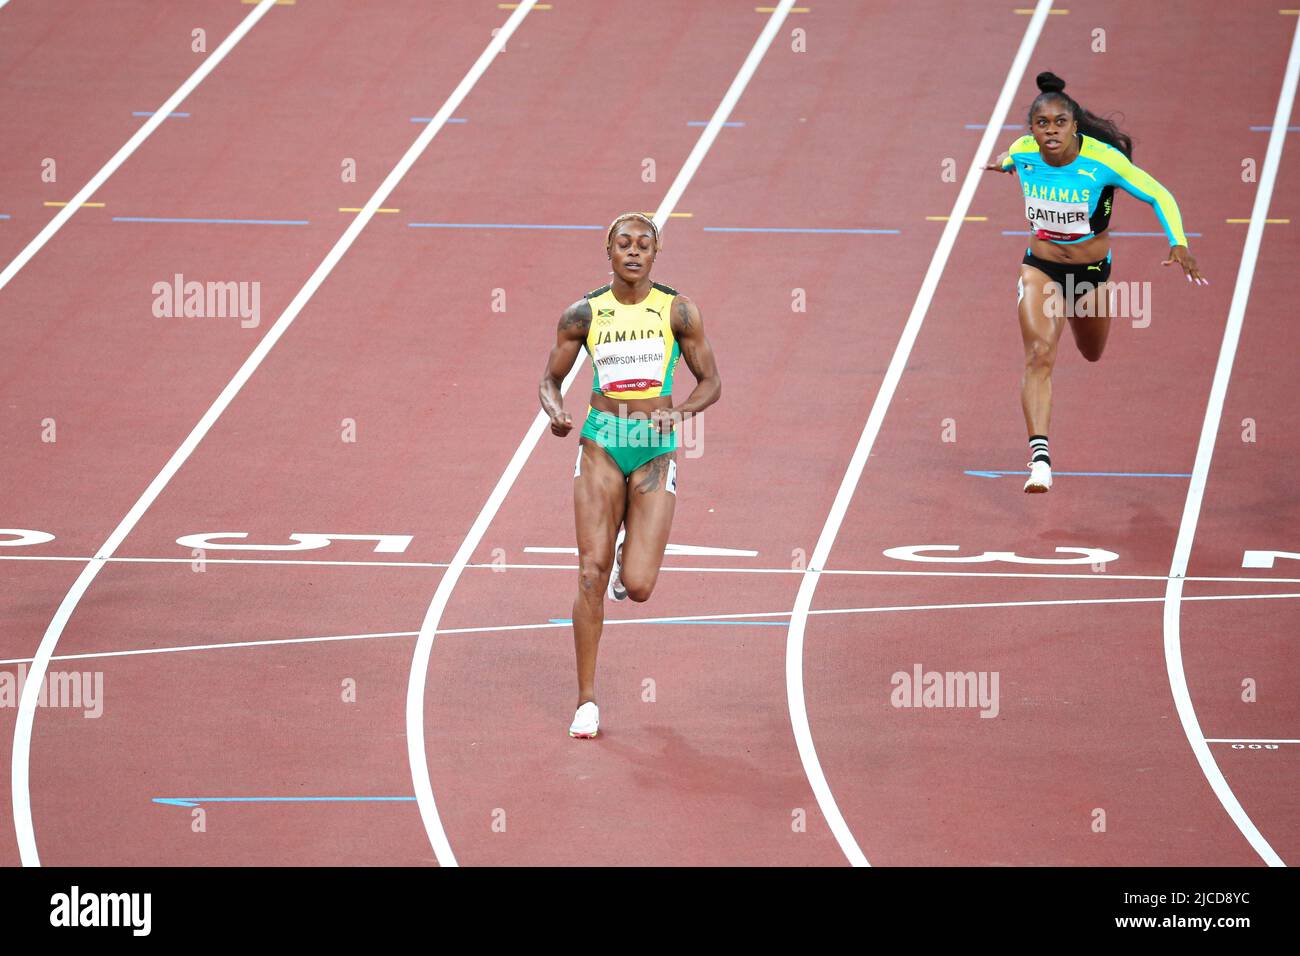 JULY 31st, 2021 - TOKYO, JAPAN: Elaine Thompson-Herah of Jamaica and Tynia Gaither of Bahamas in action during the Women's 100m Semi-Finals at the Tok Stock Photo